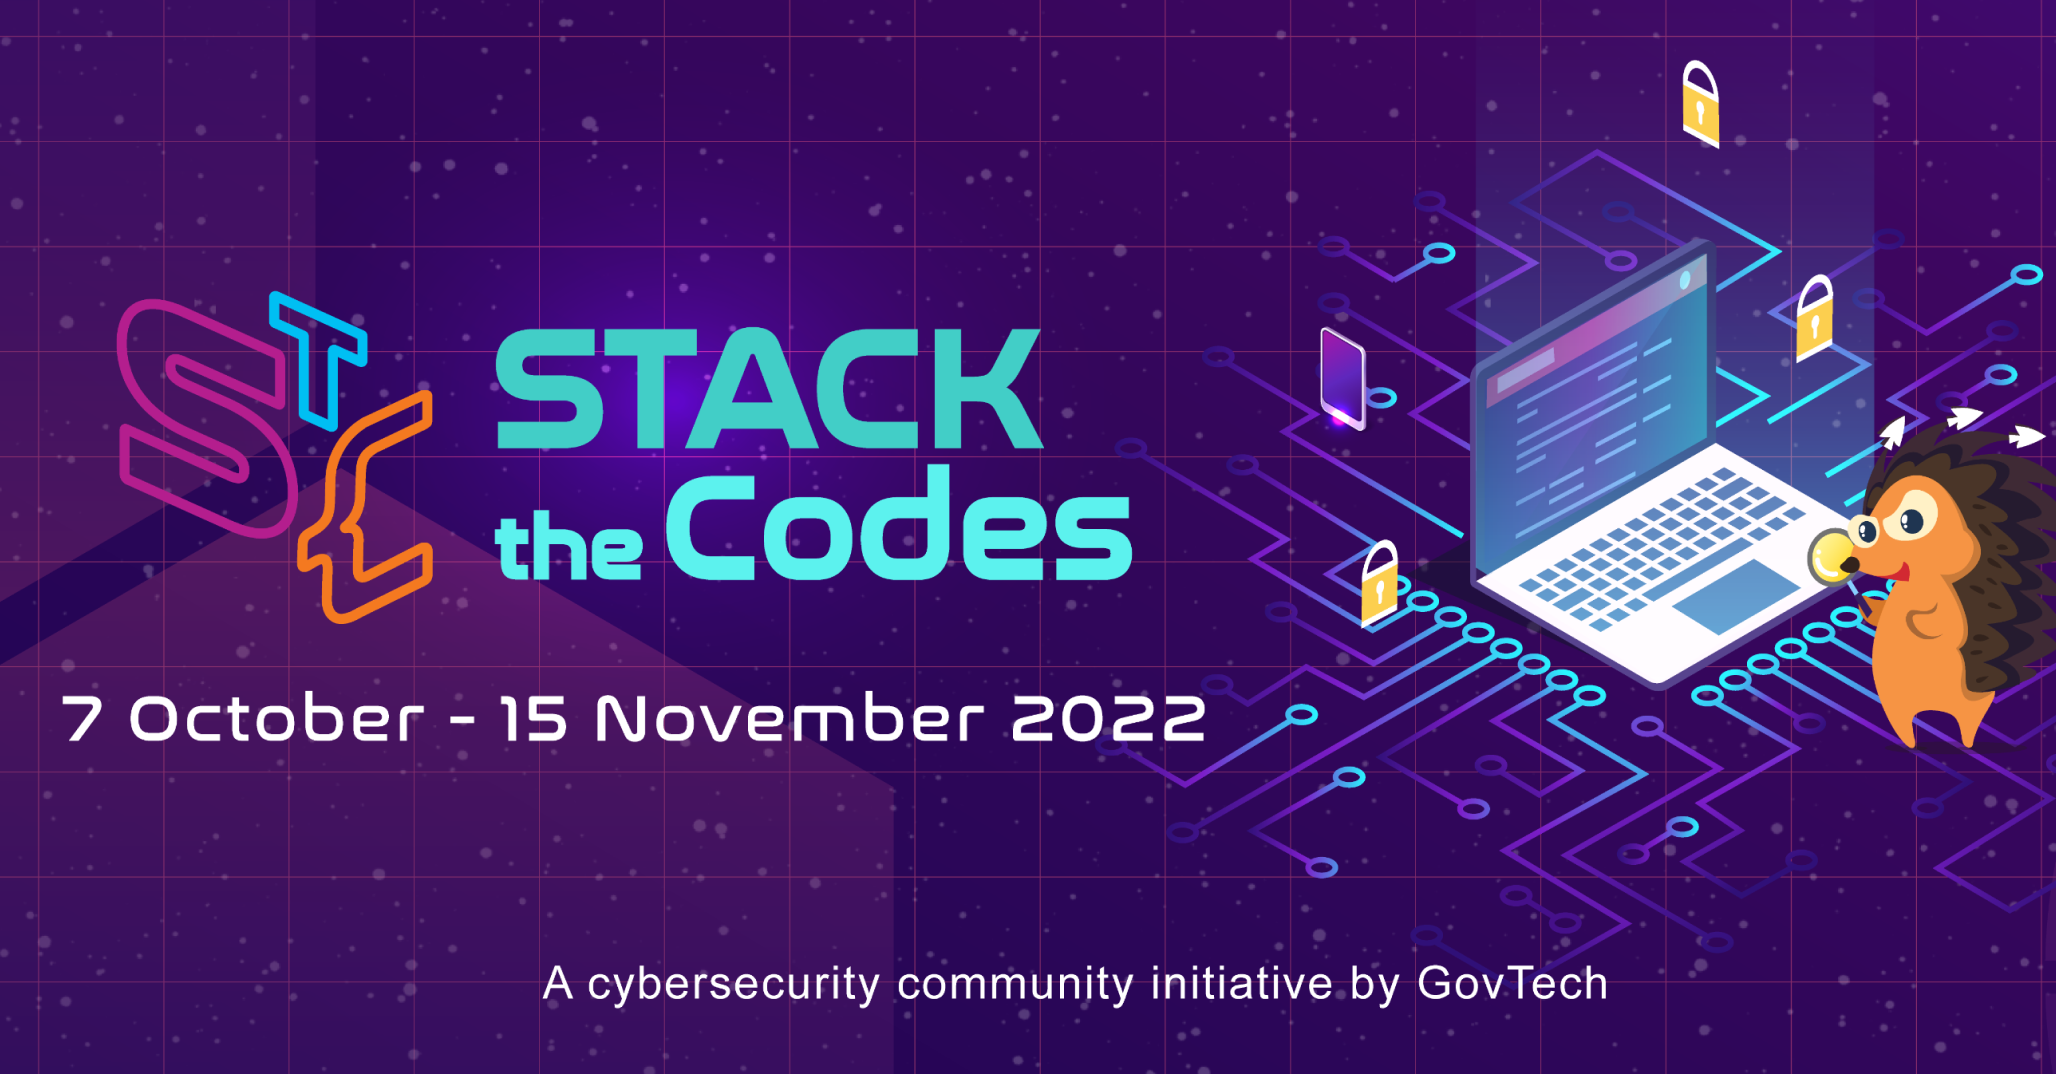 Get ready for STACK the Codes!